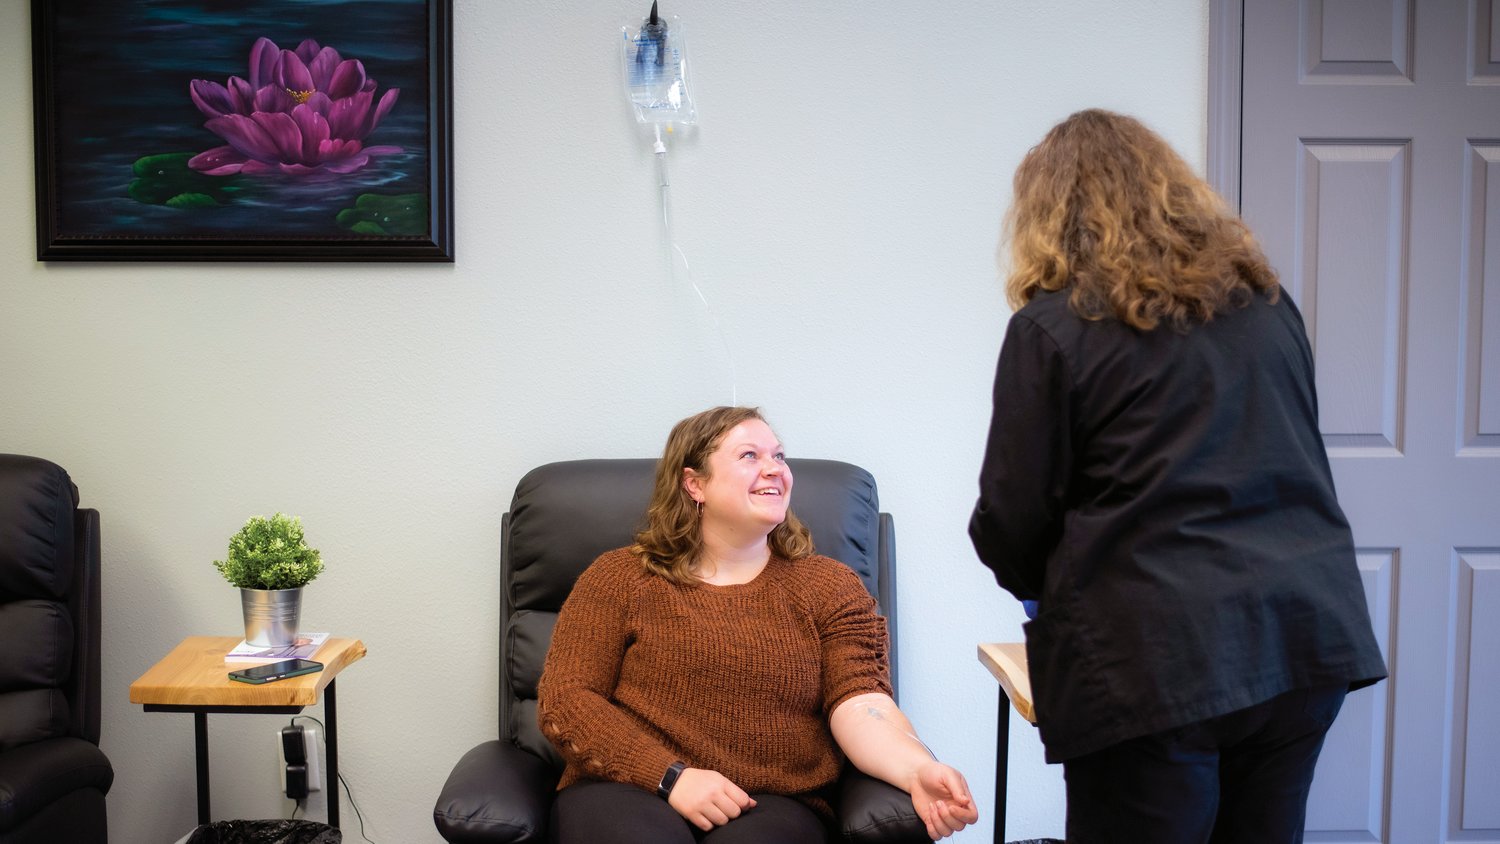 Office Manager Mikayla Rockey smiles while receiving an infusion Tuesday at Evexia Northwest in Centralia.